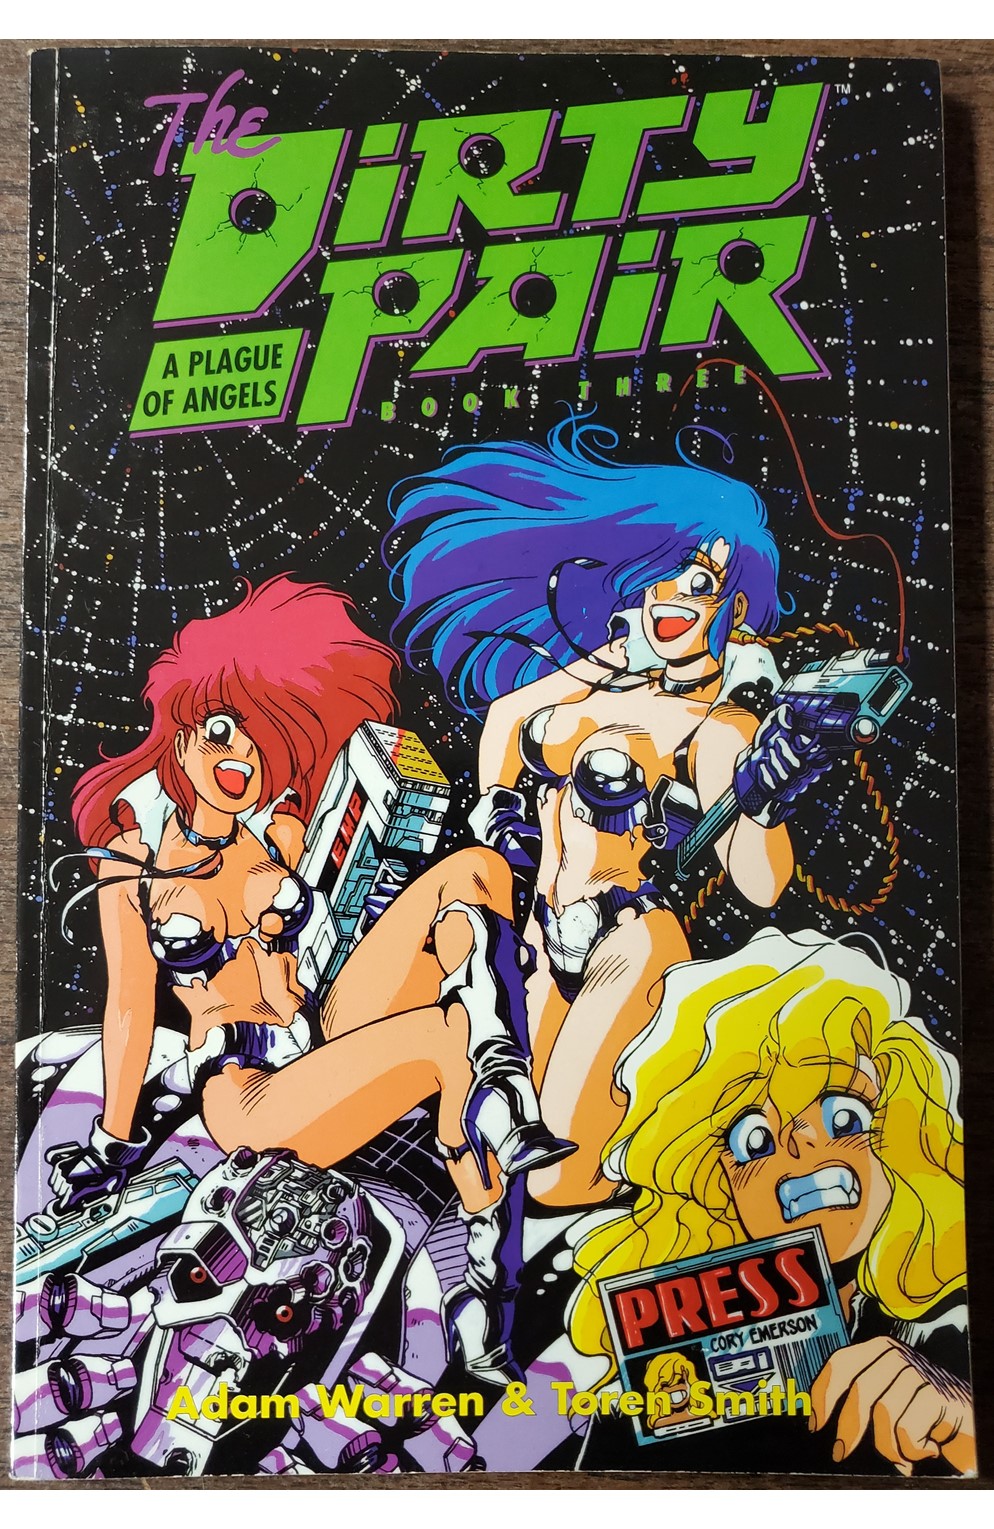 Dirty Pair Book 3 Plague of Angels Graphic Novel (Dark Horse) Used - Good